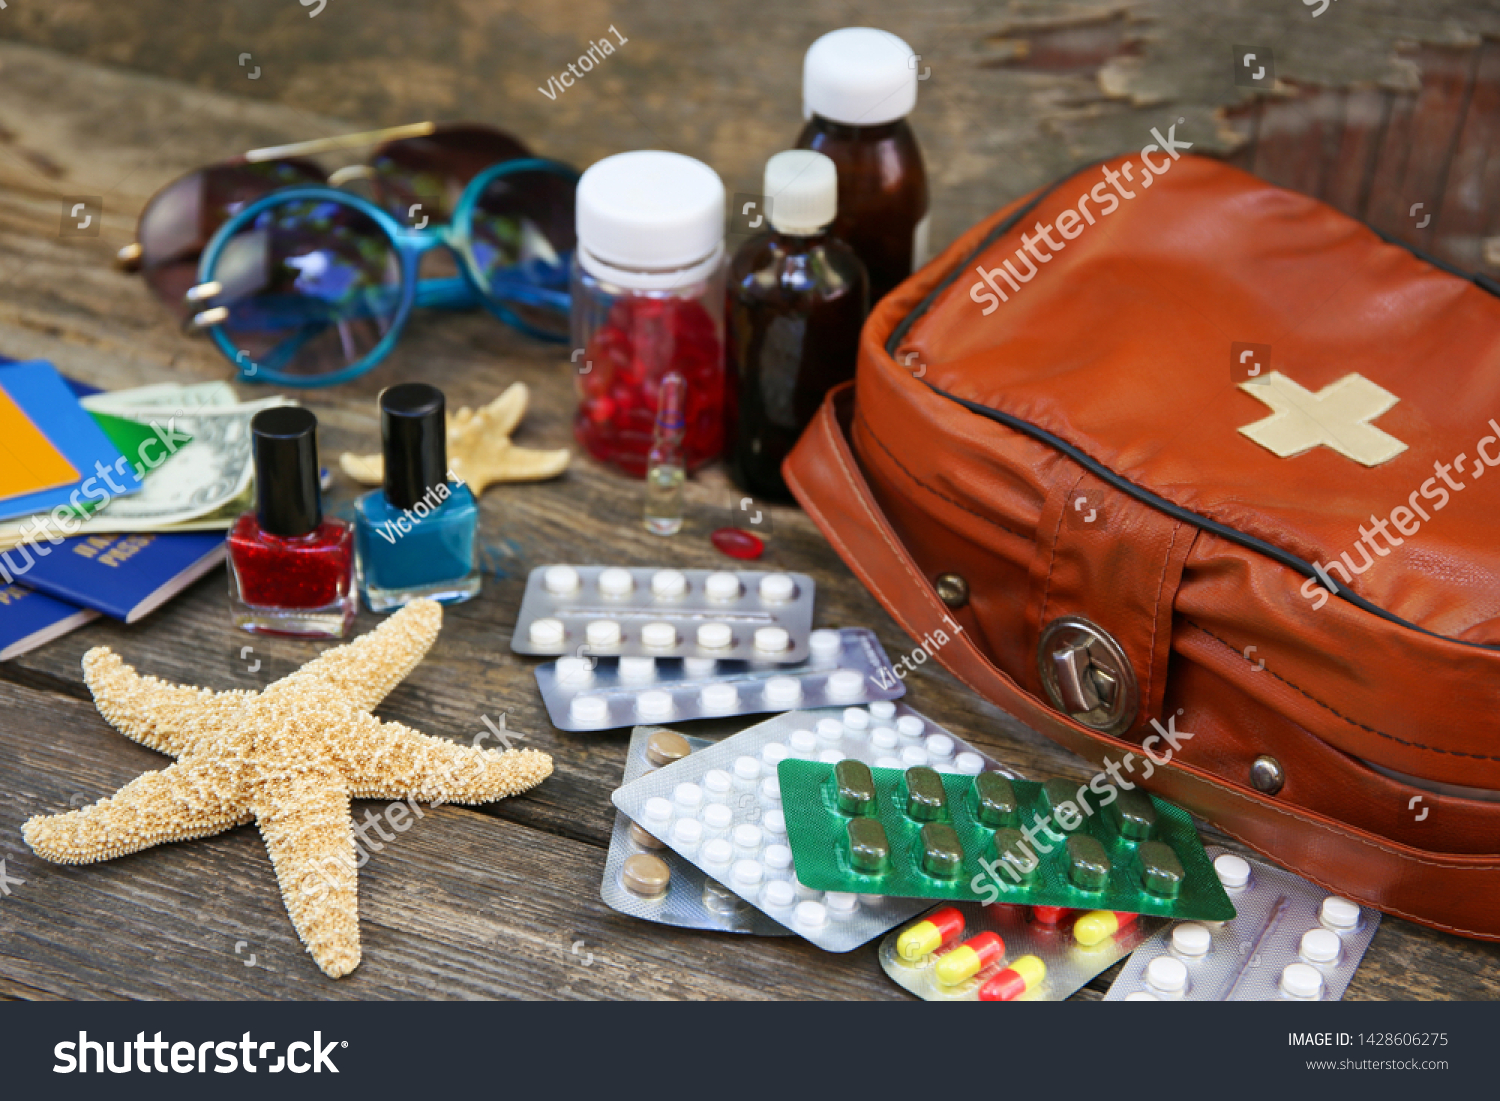 Summer women's beach accessories for your sea holiday and first aid kit on old wooden background. Concept of medication required in journey. Top view. Flat lay. #1428606275